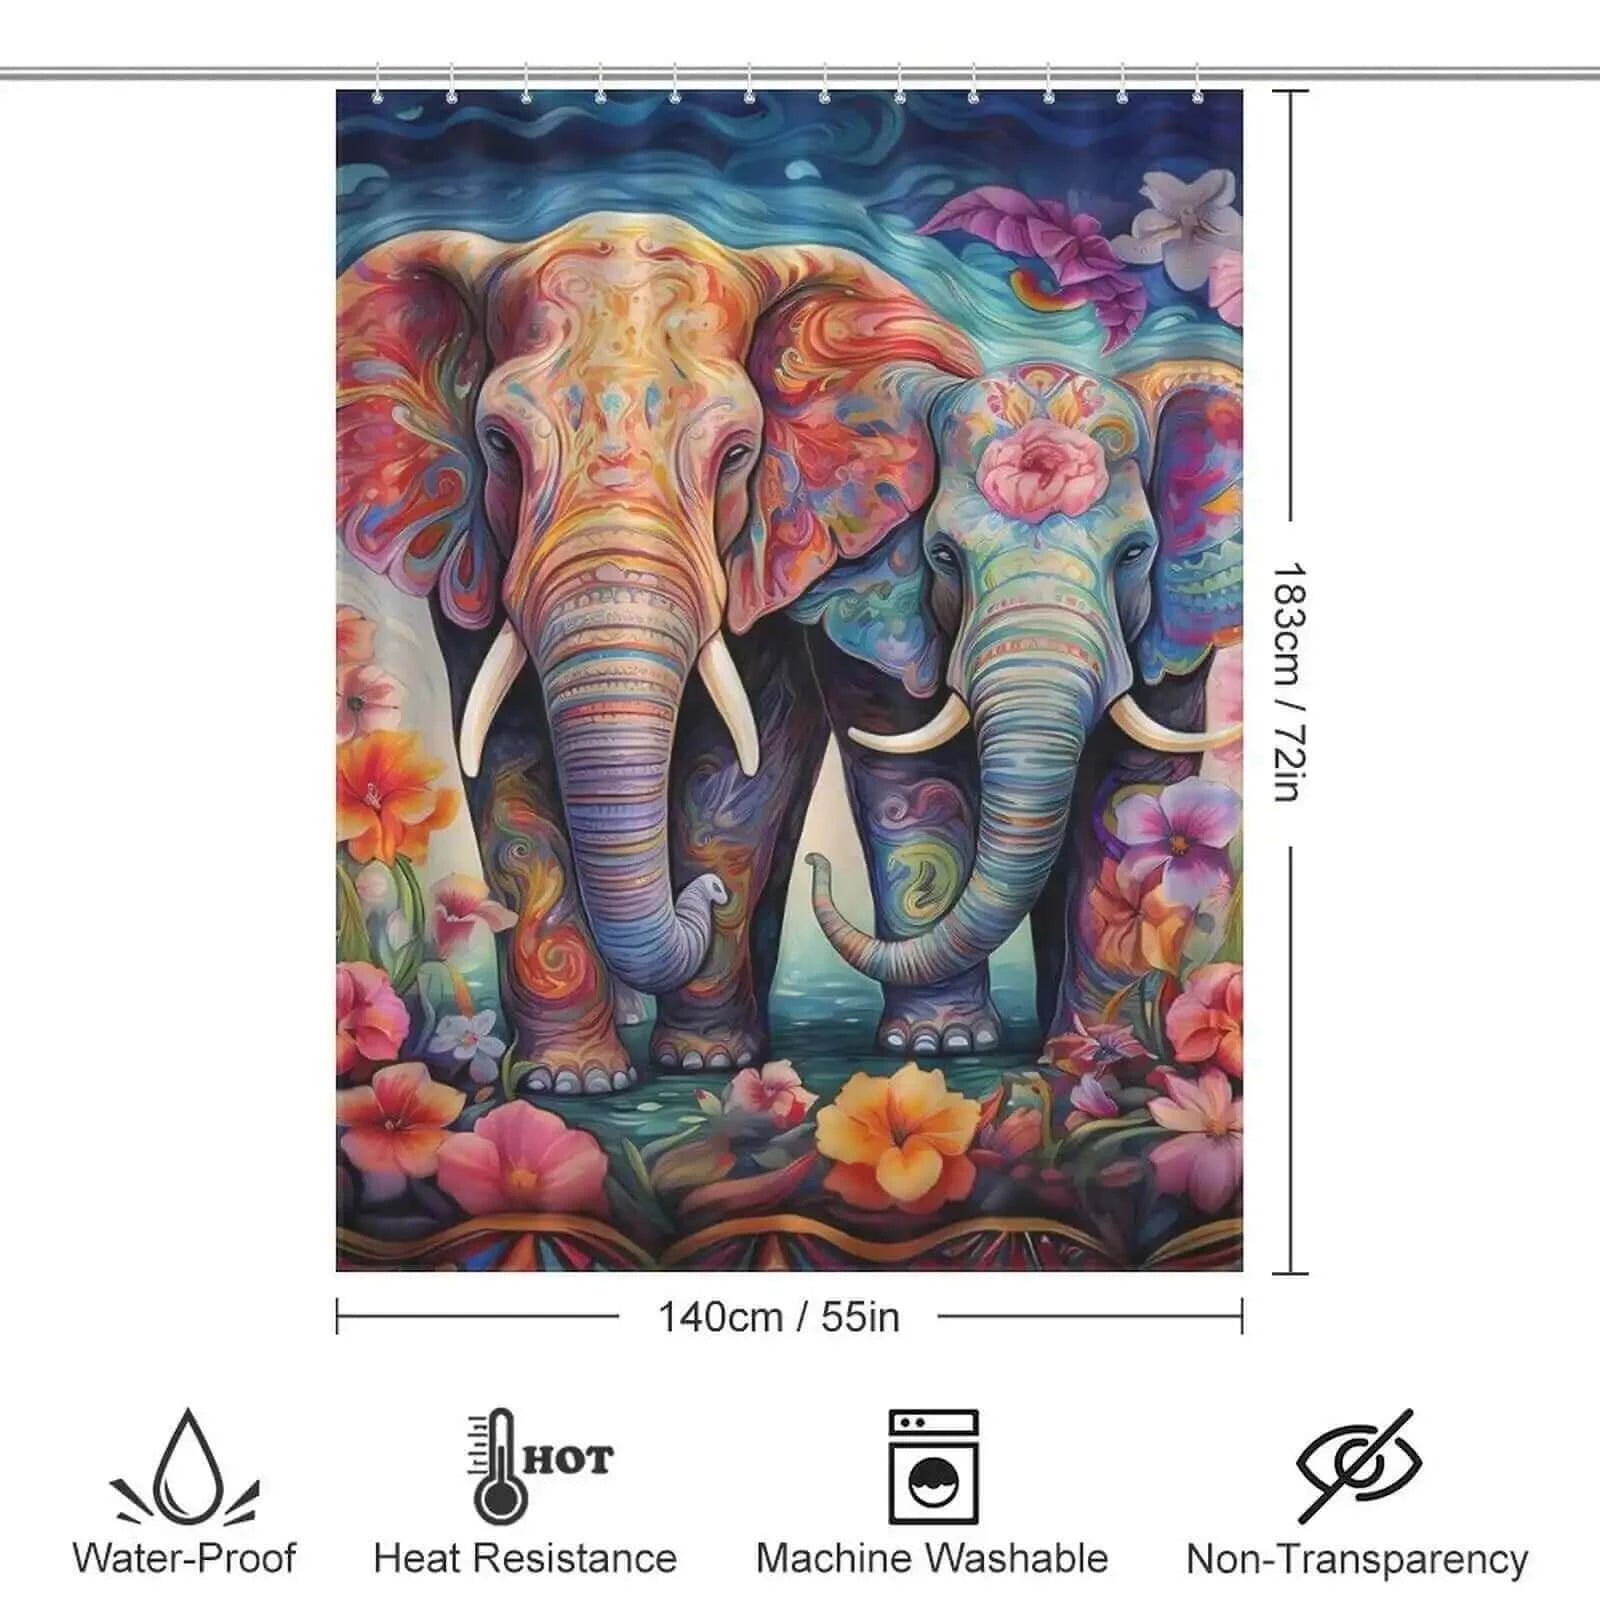 A 3D Watercolor Elephant Shower Curtain-Cottoncat featuring two elephants and flowers from the brand Cotton Cat.